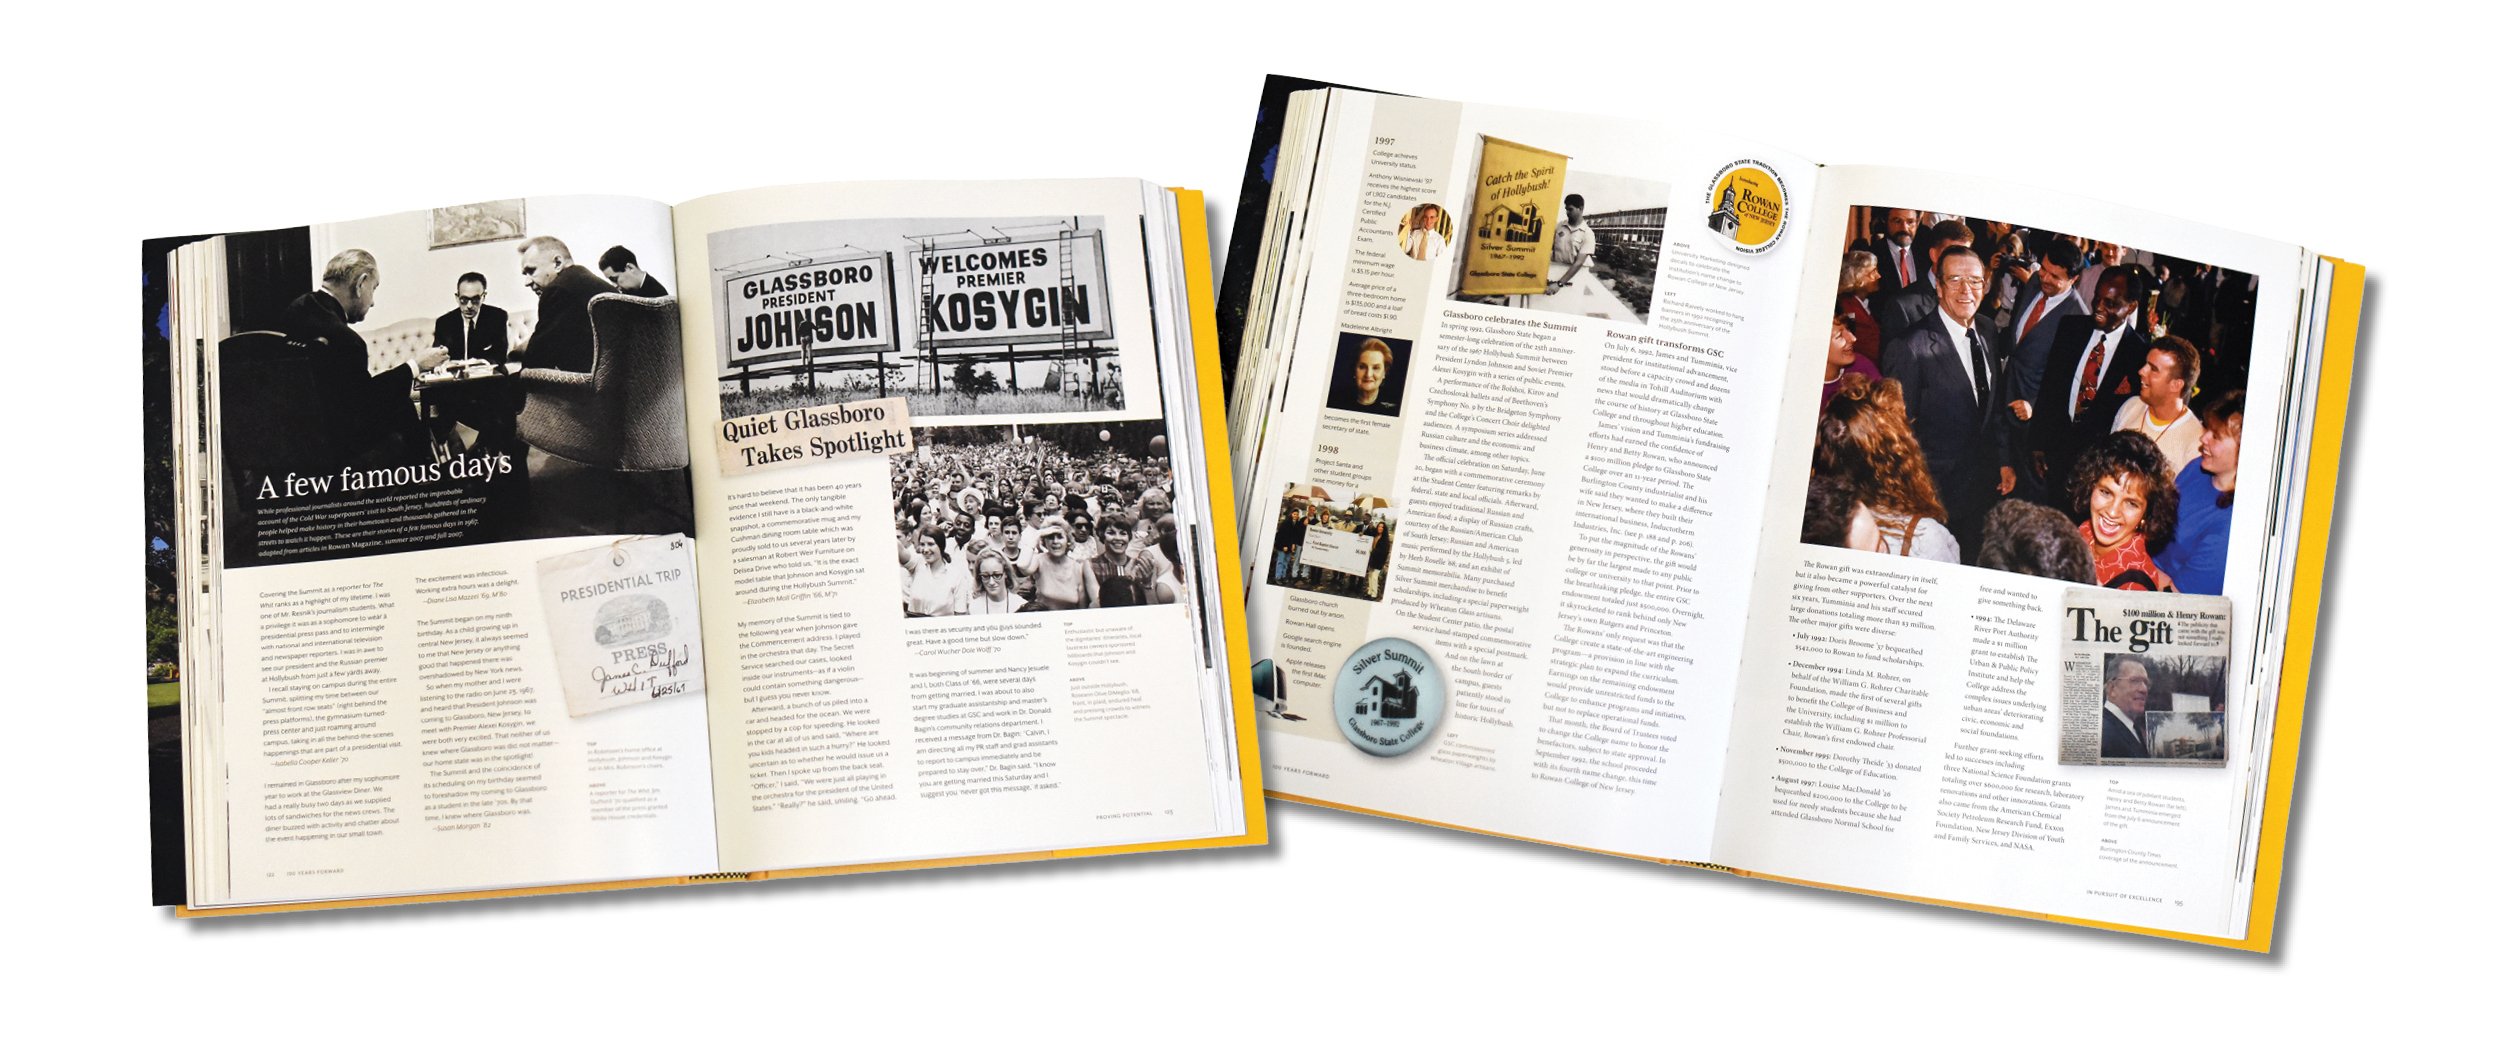 Scans of pages from "100 Years Forward: The History of Rowan University": Summit at Hollybush and Rowan gift spreads